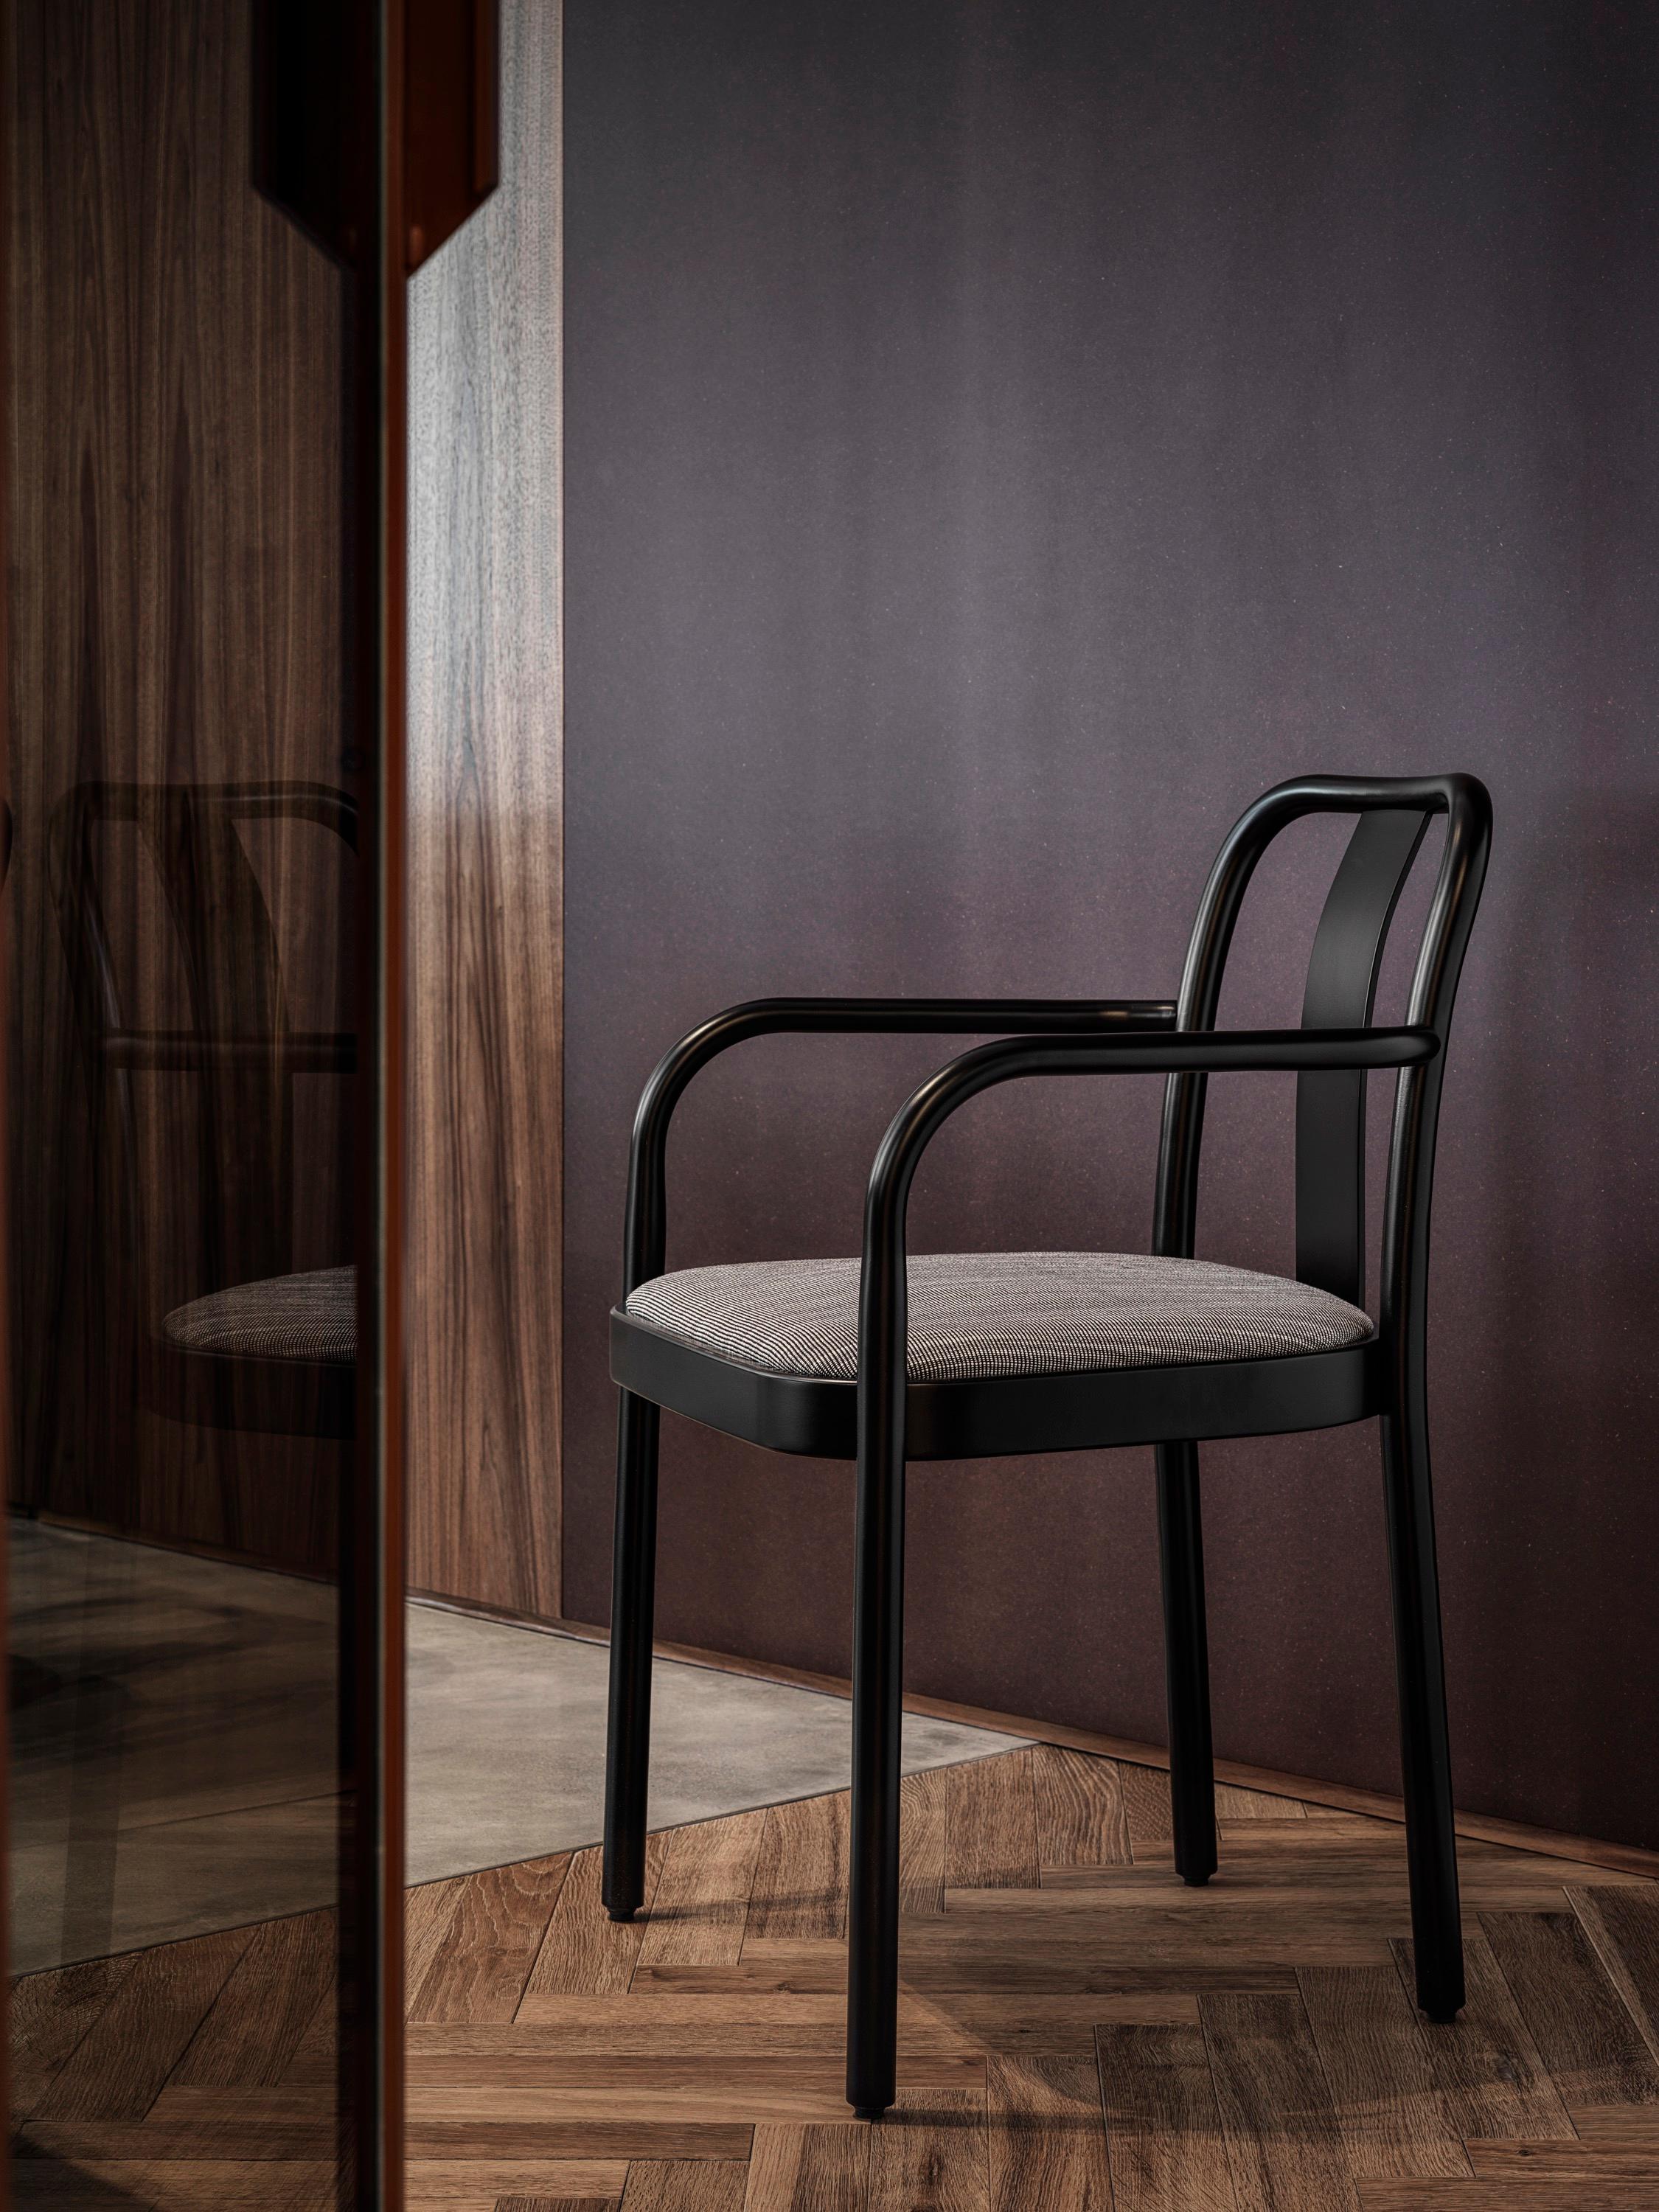 Gebrüder Thonet Vienna GmbH Sugiloo Chair in Dark Green by Michael Anastassiades In New Condition For Sale In Brooklyn, NY